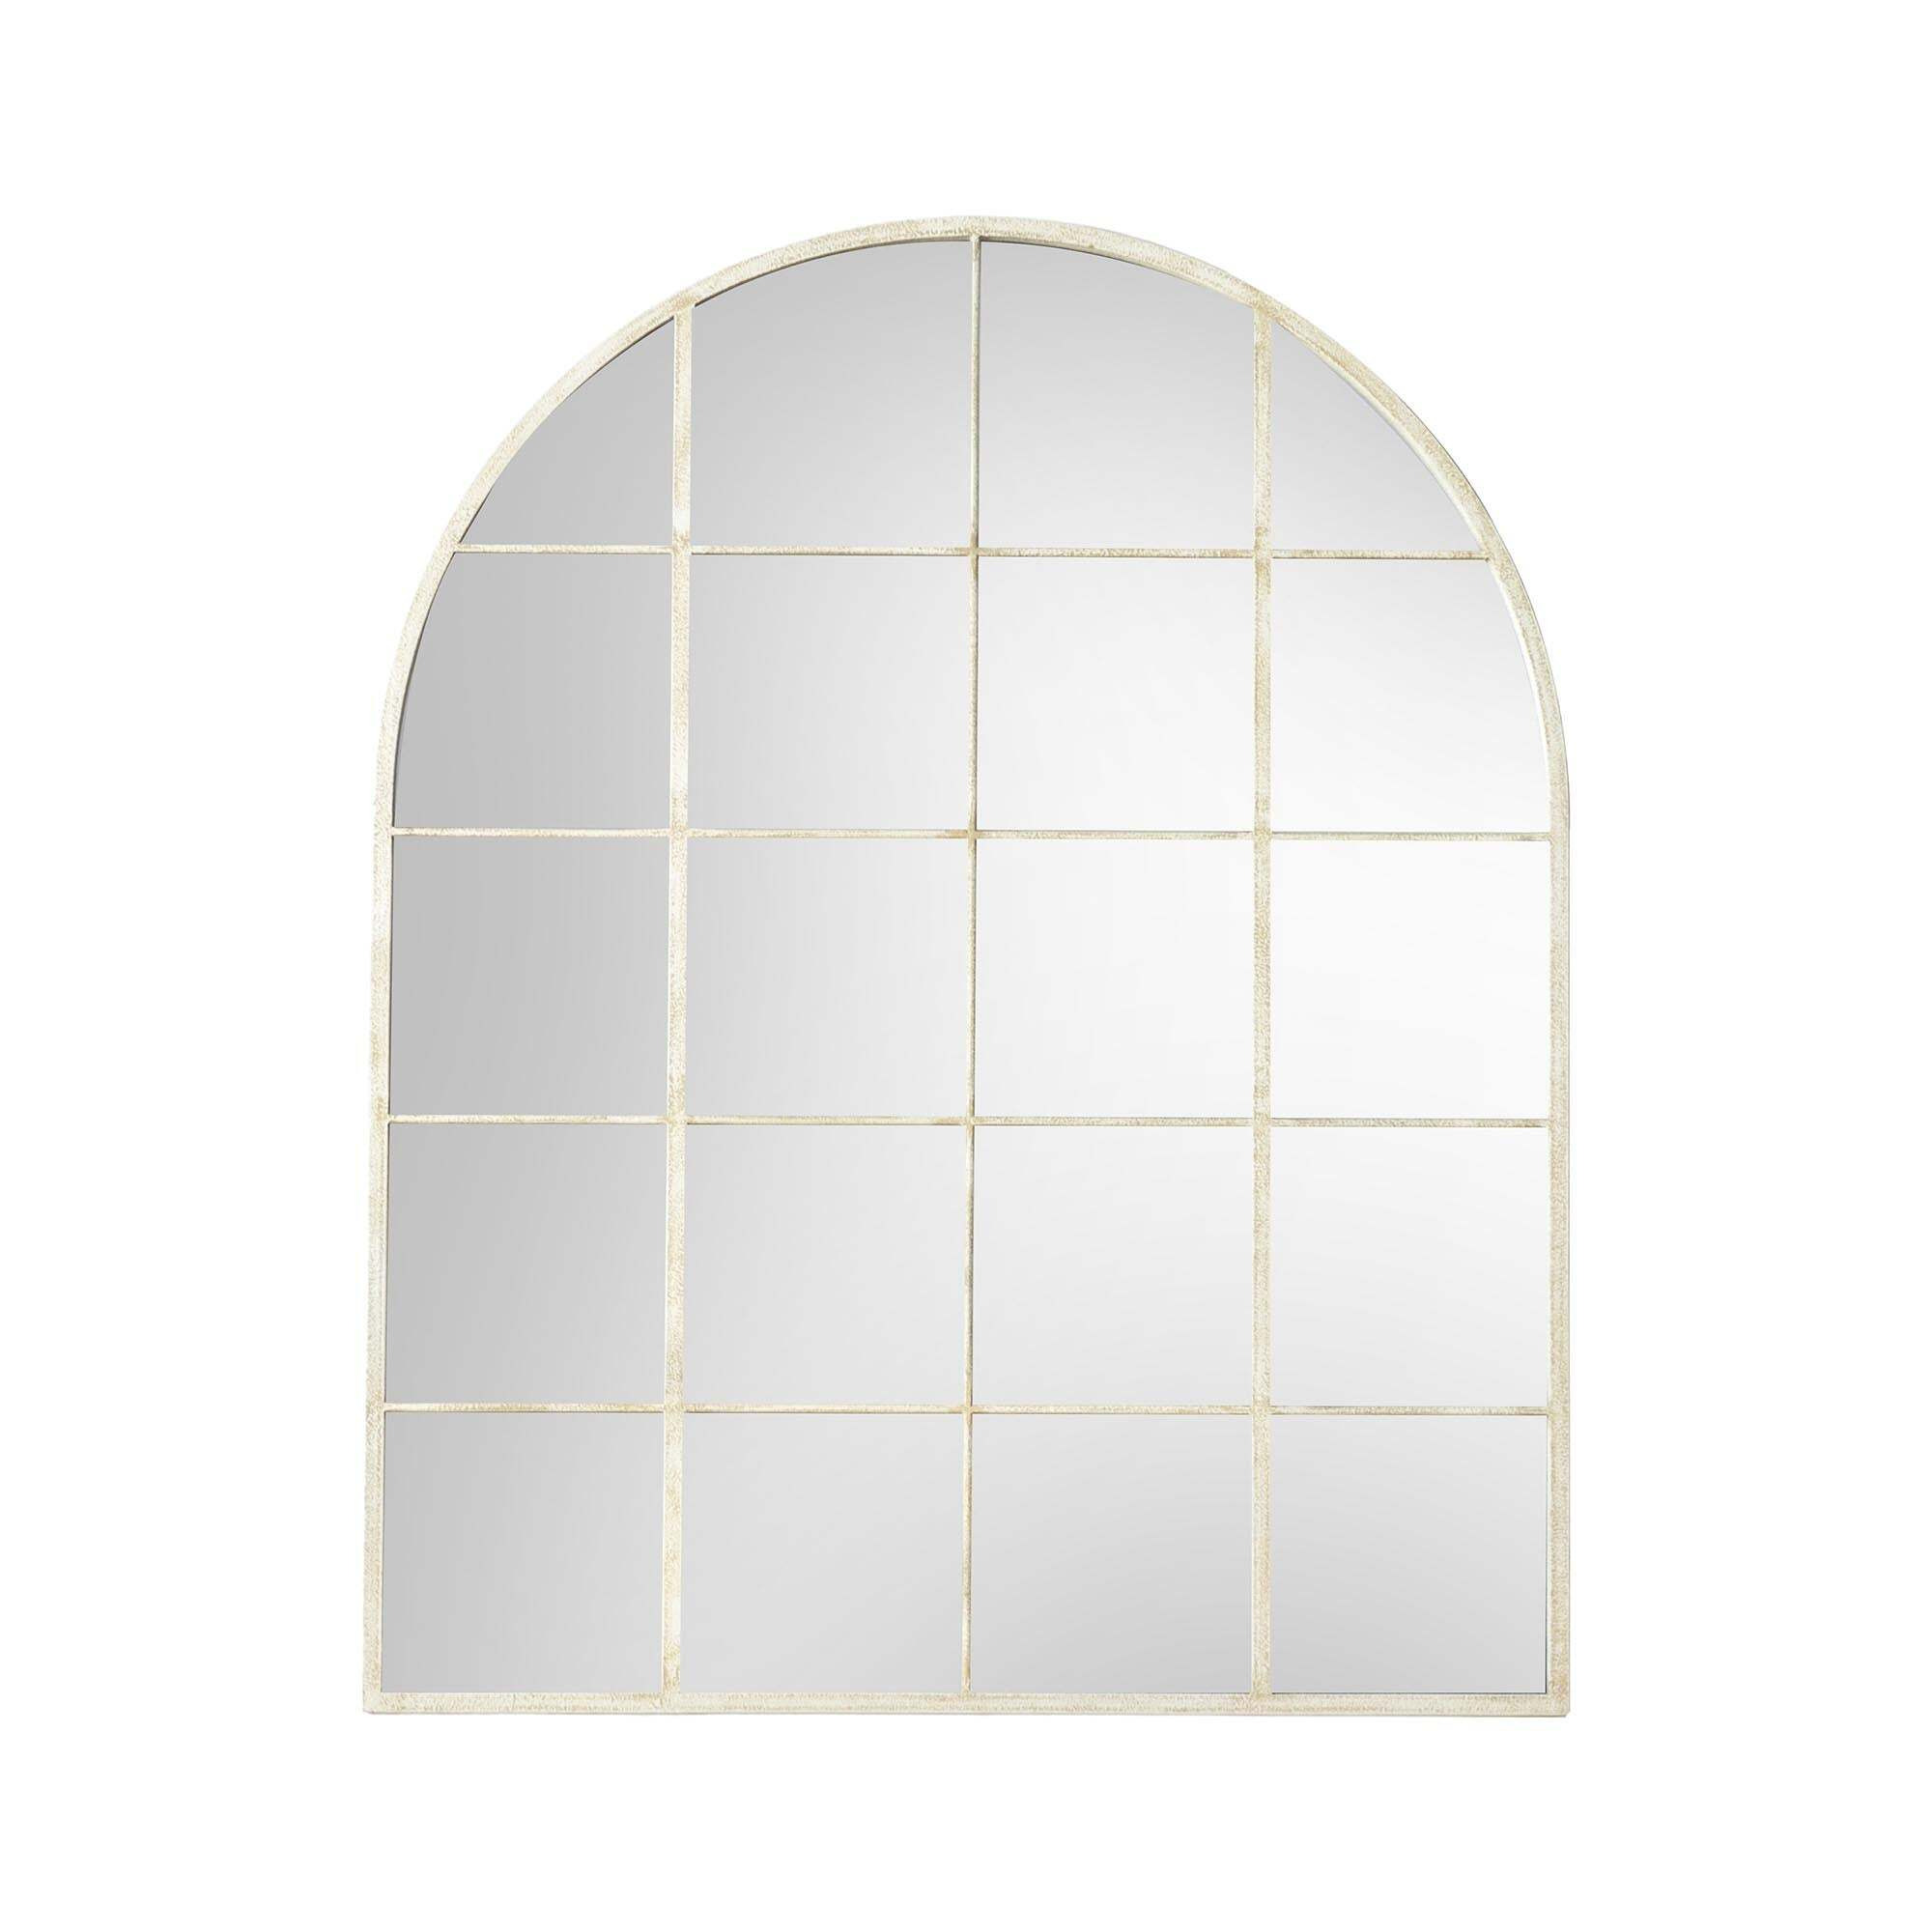 Rockwood Arched Mirror, White 76x95cm White